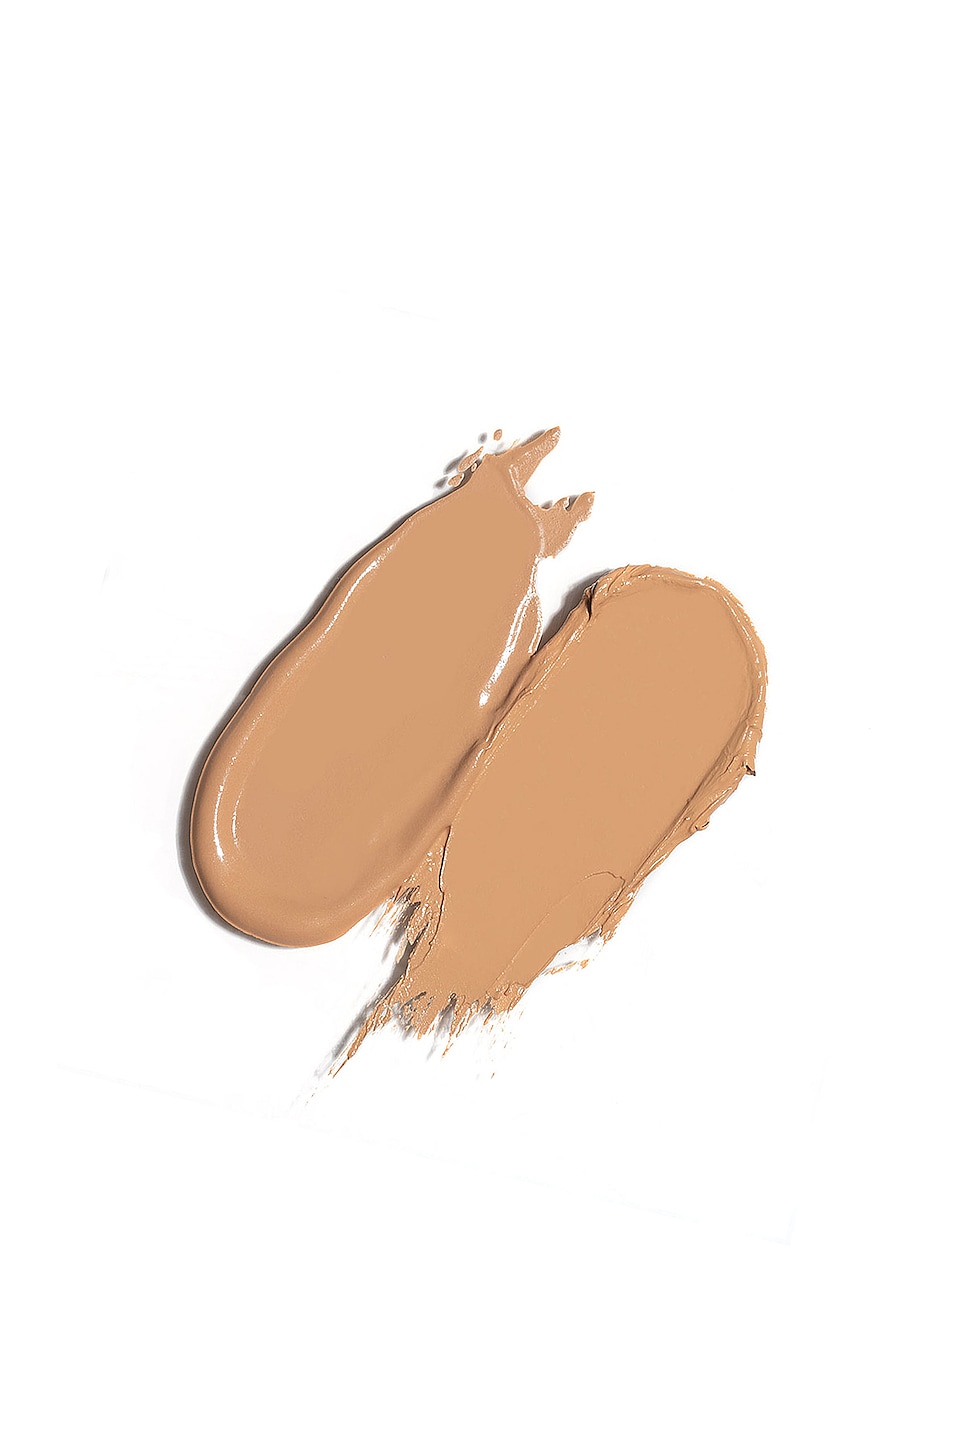 Shop Wander Beauty Dualist Matte And Illuminating Concealer In Tan